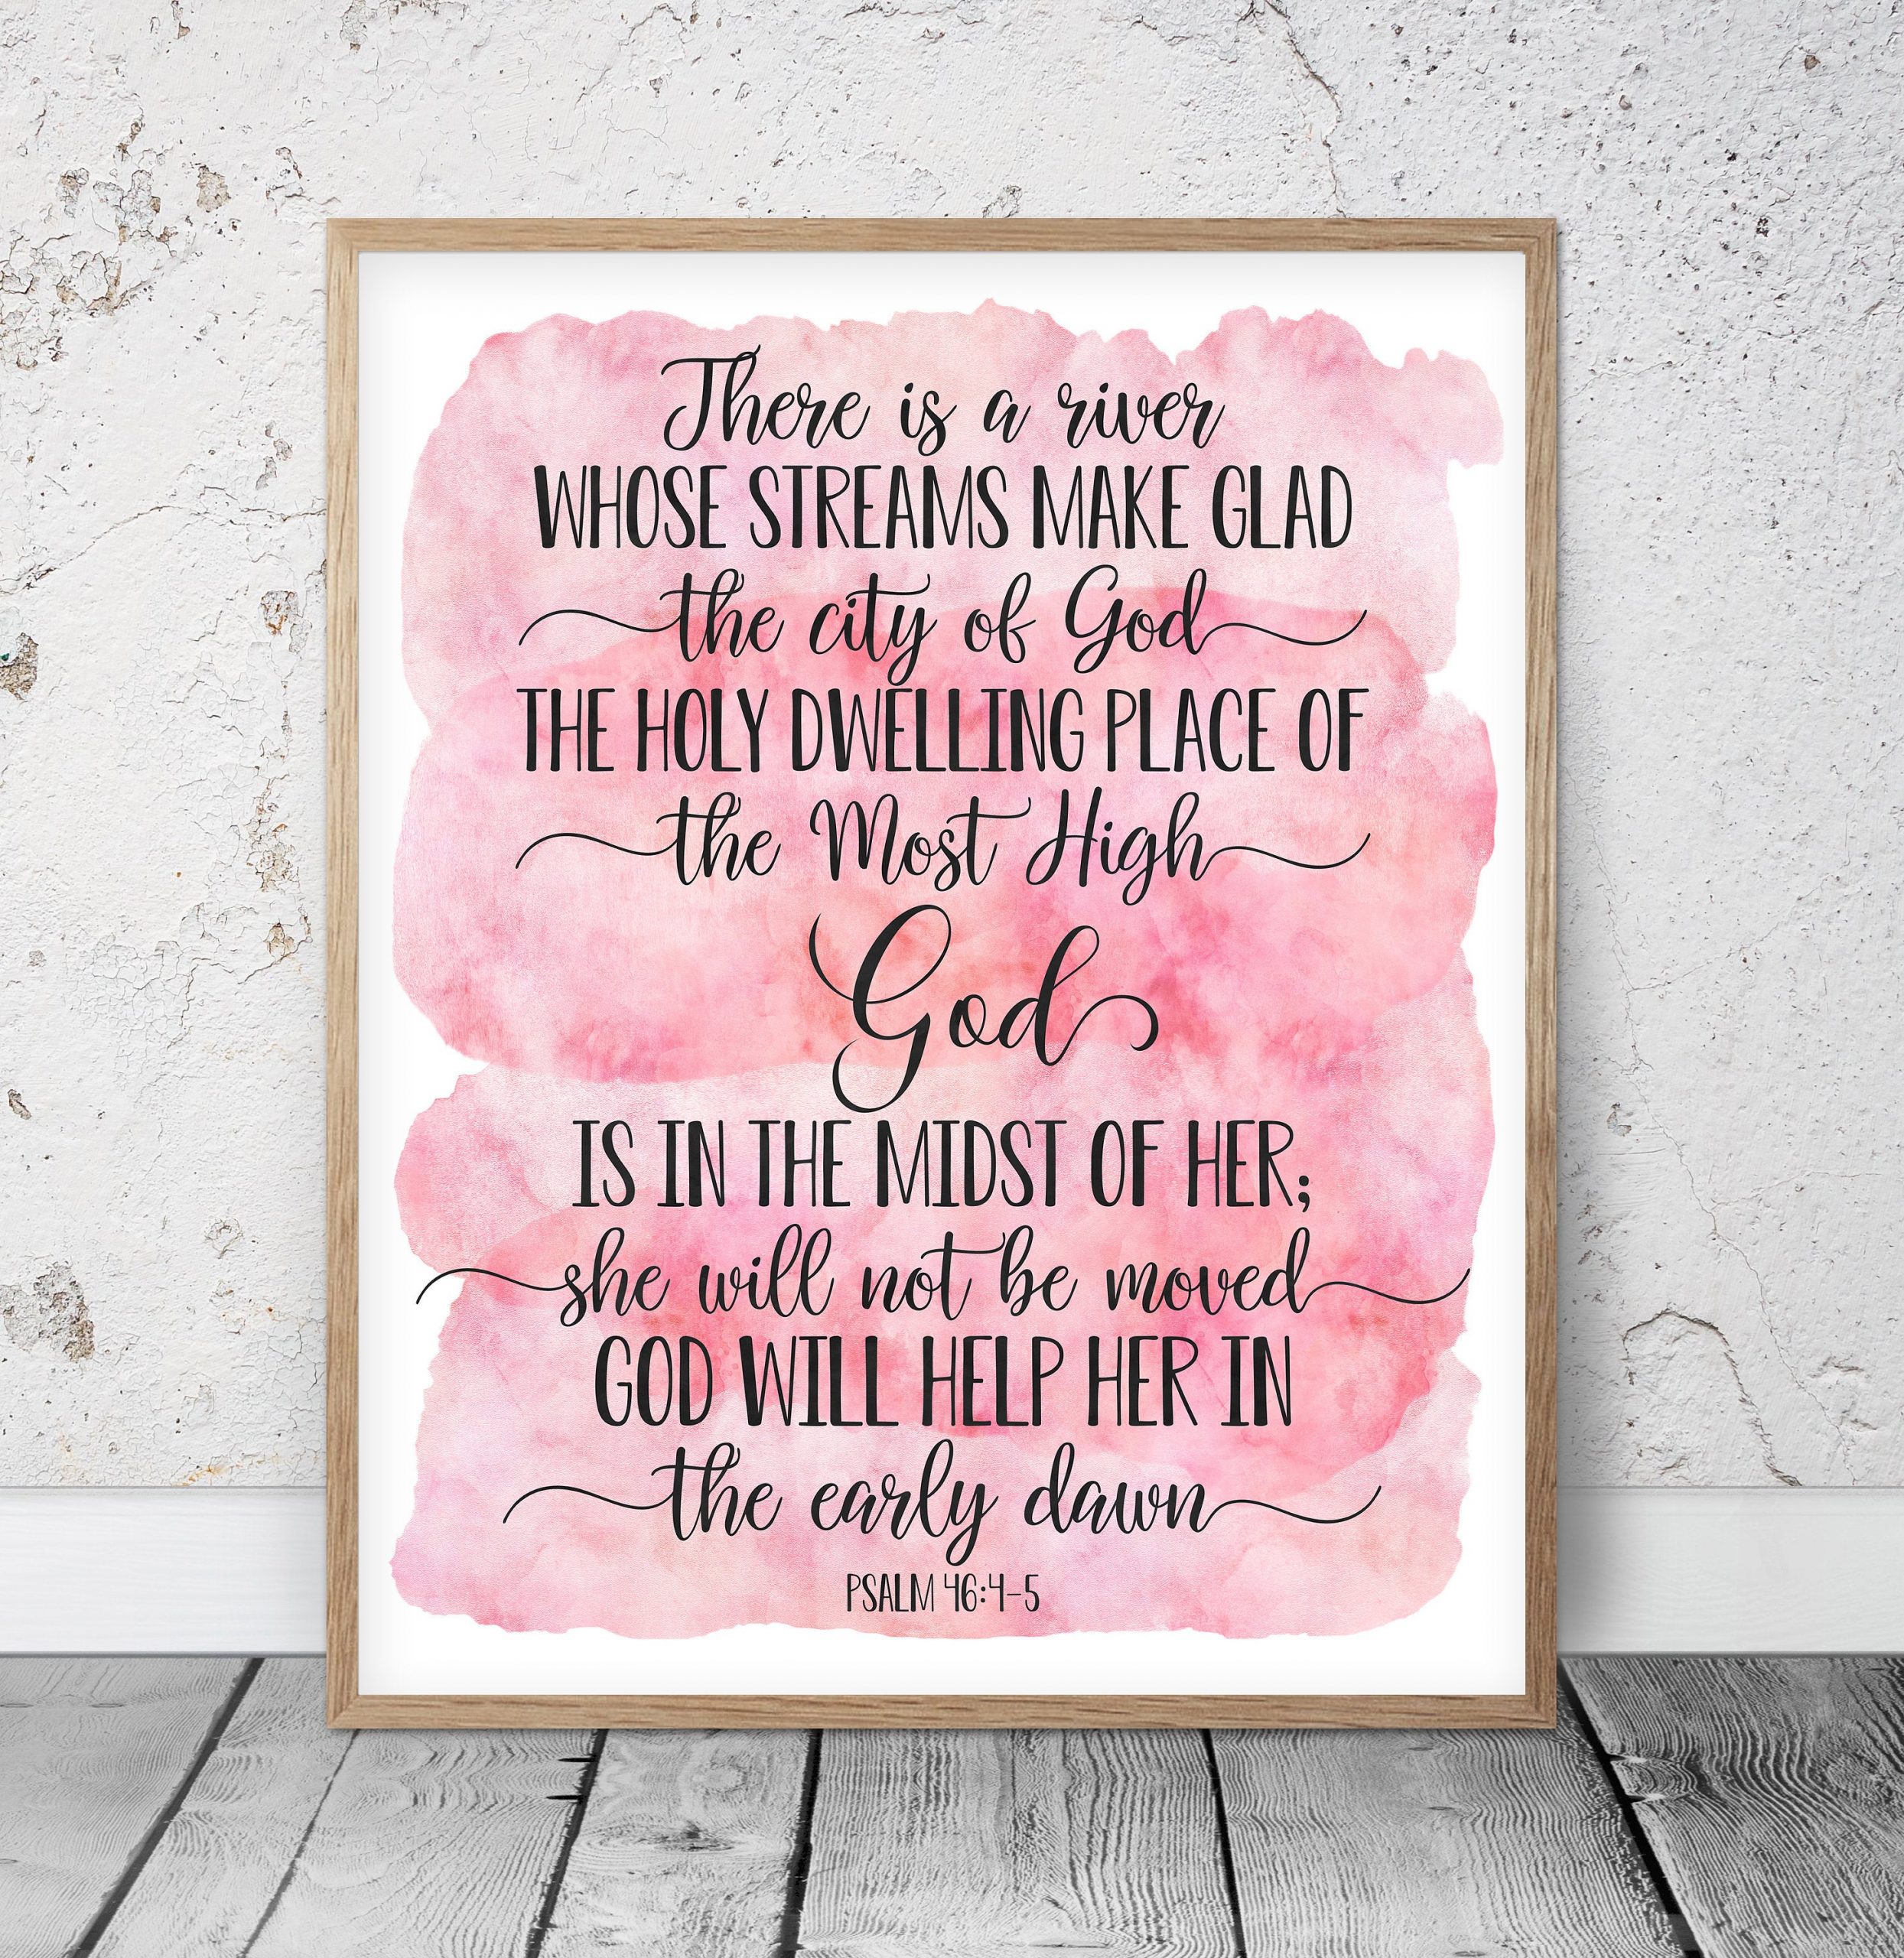 God Is In The Midst Of Her, Psalm 46:4-5,Bible Verse Printable Wall Art,Nursery Decor,Bible Quotes